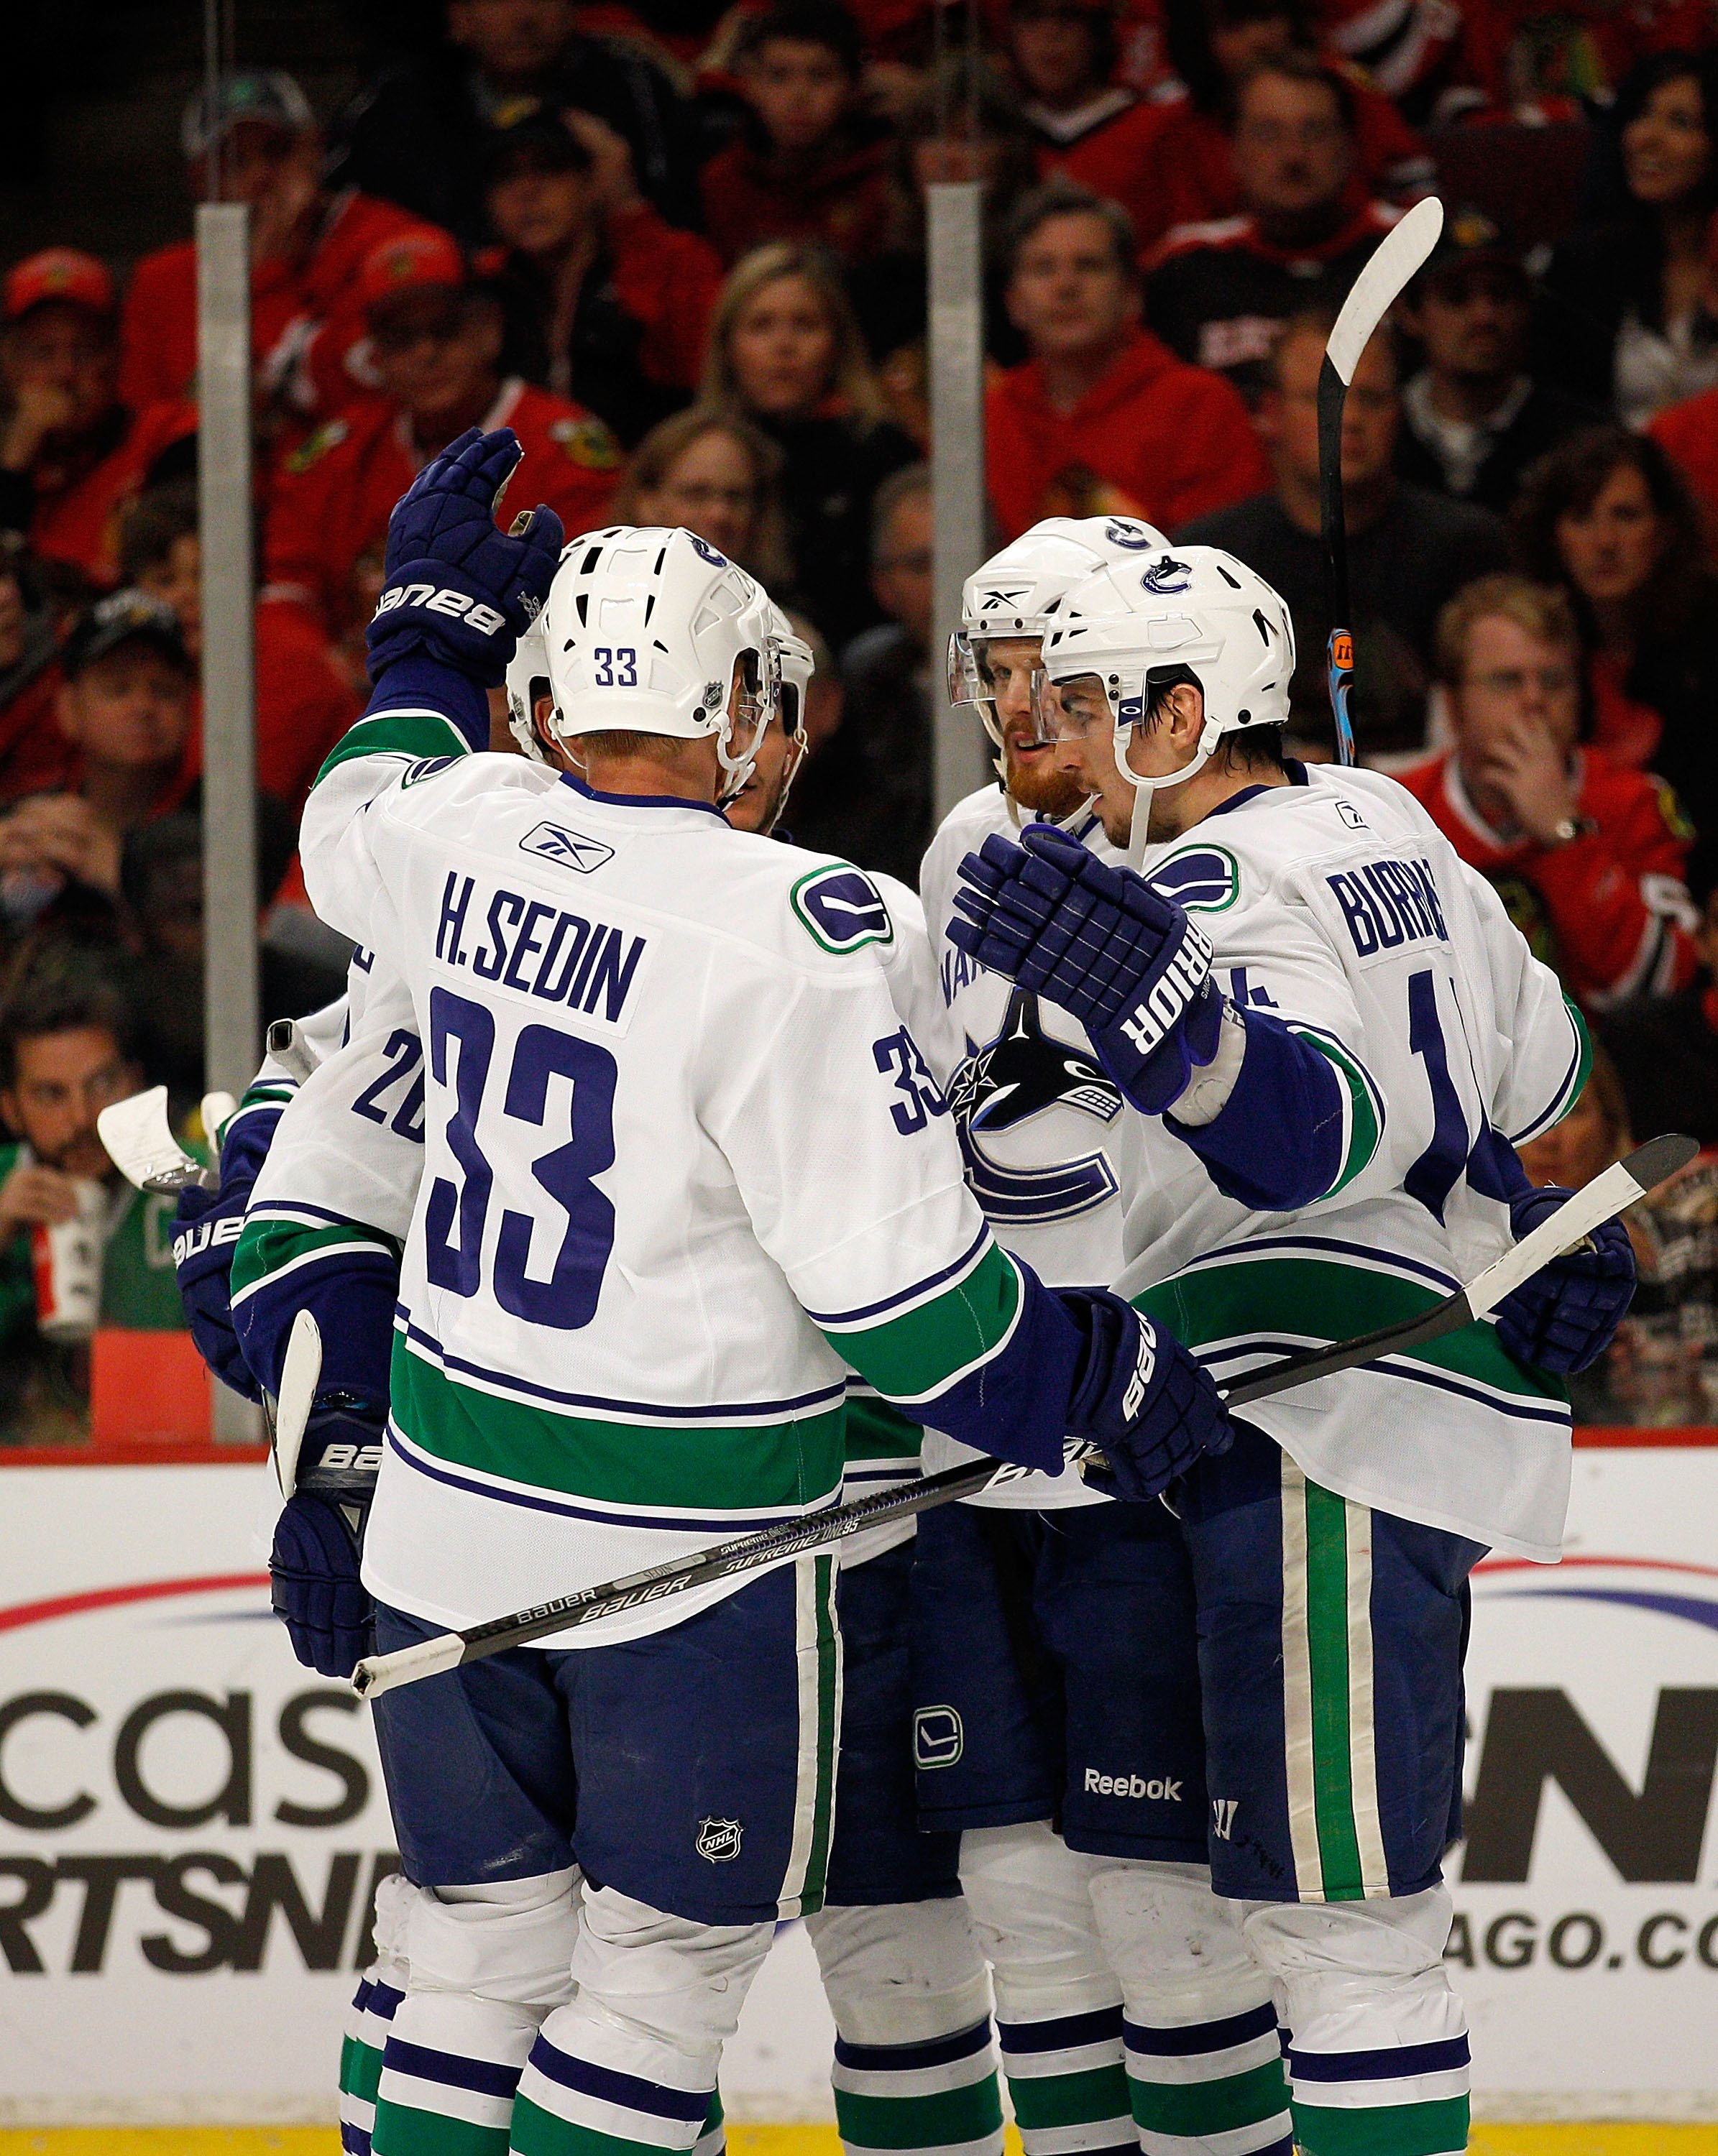 CHICAGO - MAY 09: Members of the Vancouver Canucks including Henrik Sedin #33 and Alexandre Burrows #14 celebrate a 2nd period goal against the Chicago Blackhawks in Game Five of the Western Conference Semifinals during the 2010 NHL Stanley Cup Playoffs a